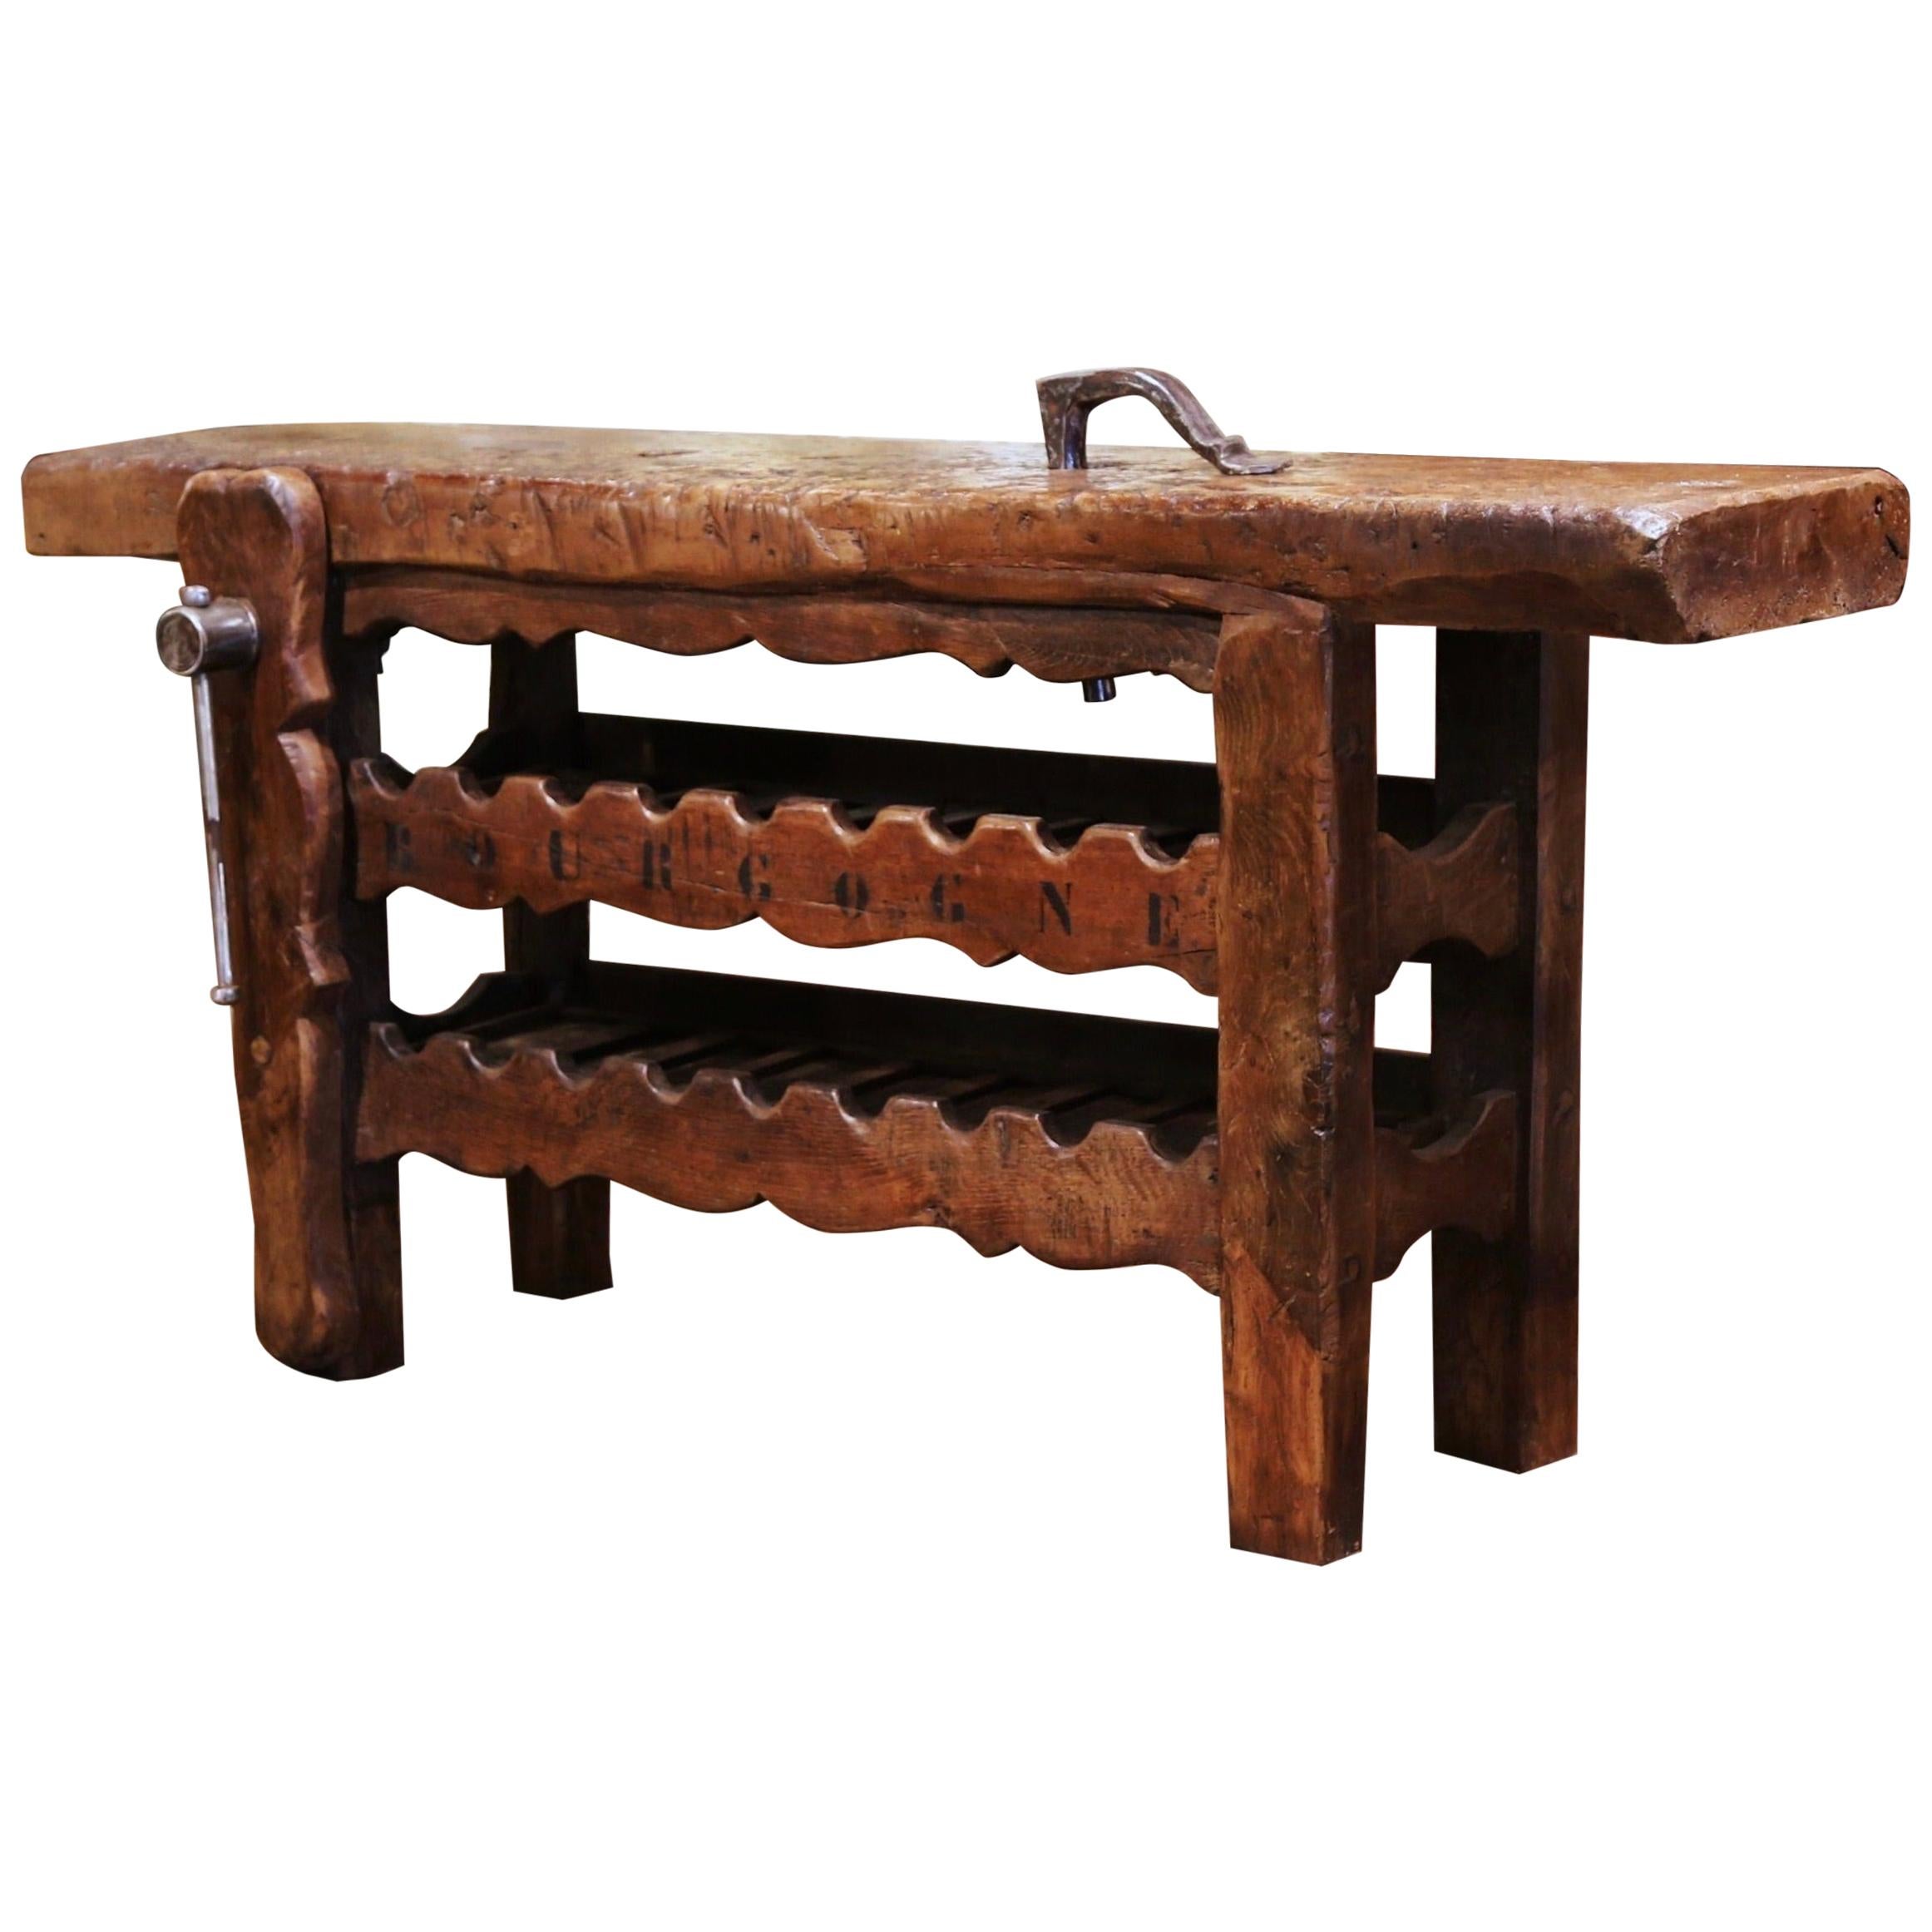 19th Century French Oak Carpenter Press Table with 18 Bottles Storage Rack